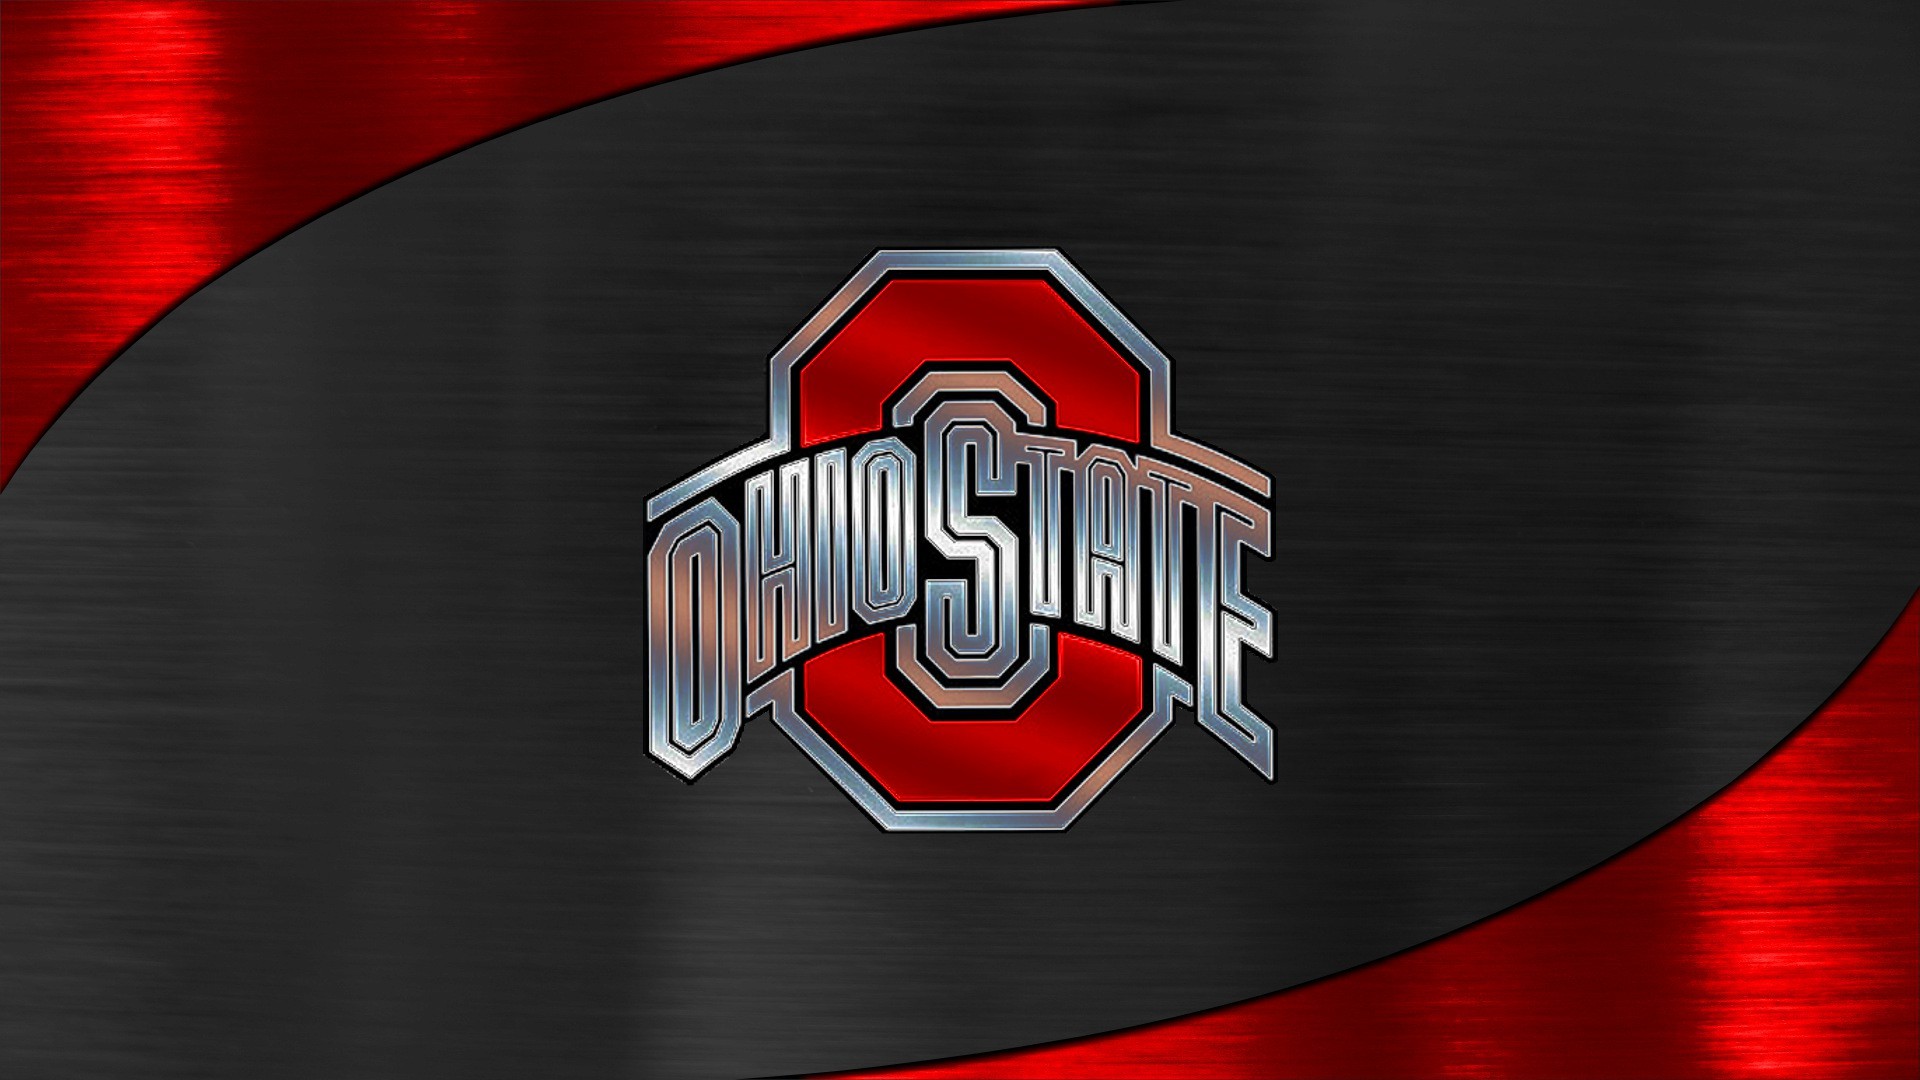 1920x1080 ... Newest Ohio State Football Wallpapers Wallpaper HD 1080p Free Download  For Laptop 4K Mobile Wallpapers Desktop